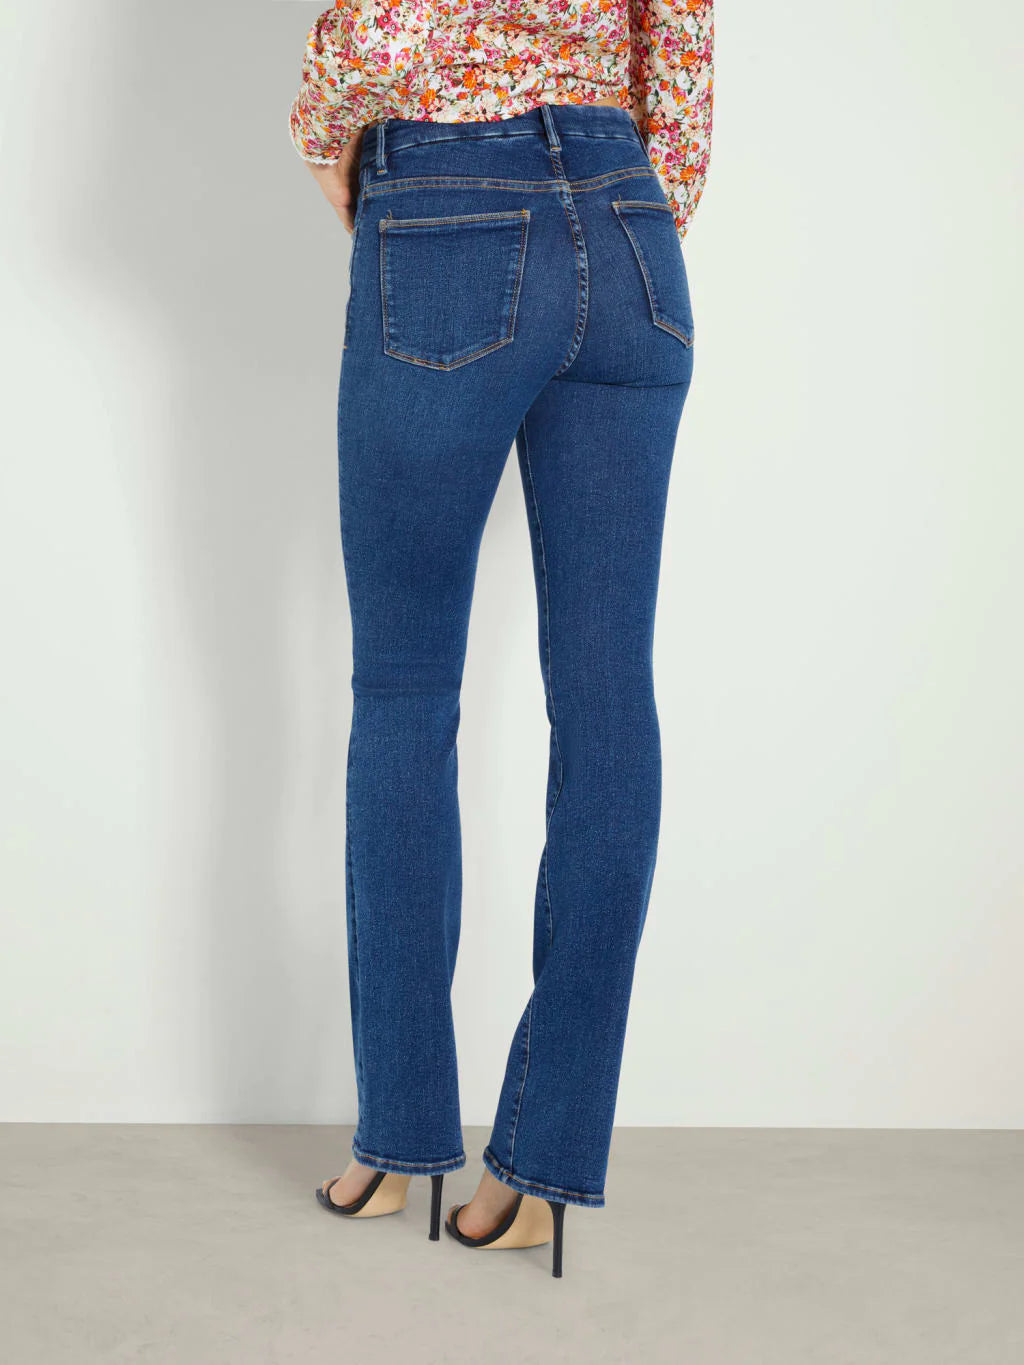 Guess sexy boot jeans for women